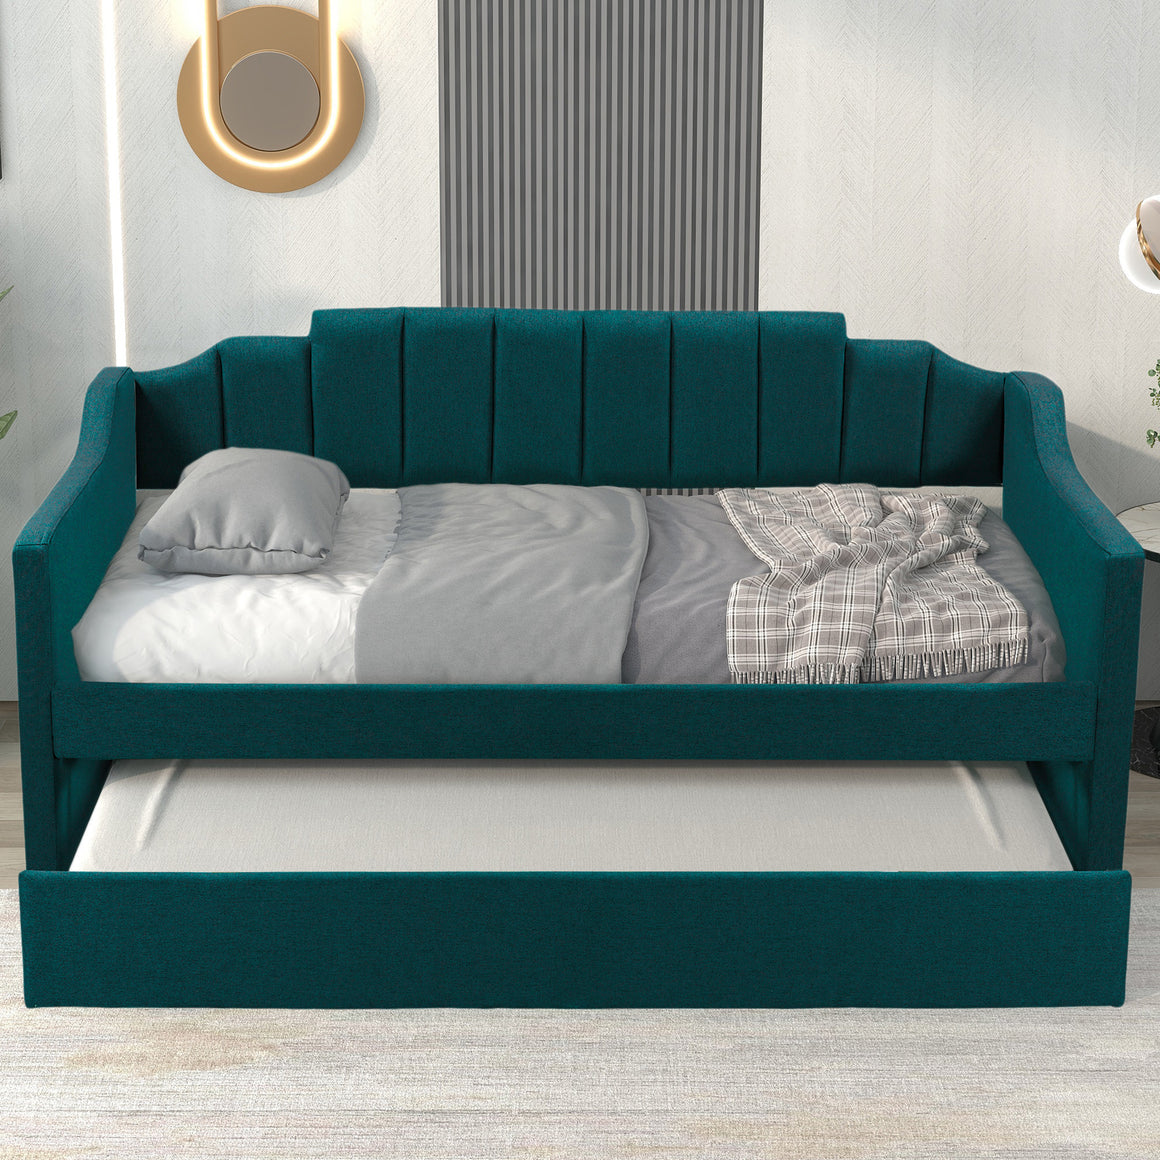 uhomepro Upholstered Twin Size Wooden Slats Daybed Bed with Trundle, Sofa Bed Platform Bed Frame with Armrest and Back Support, No Box Spring Needed, Green